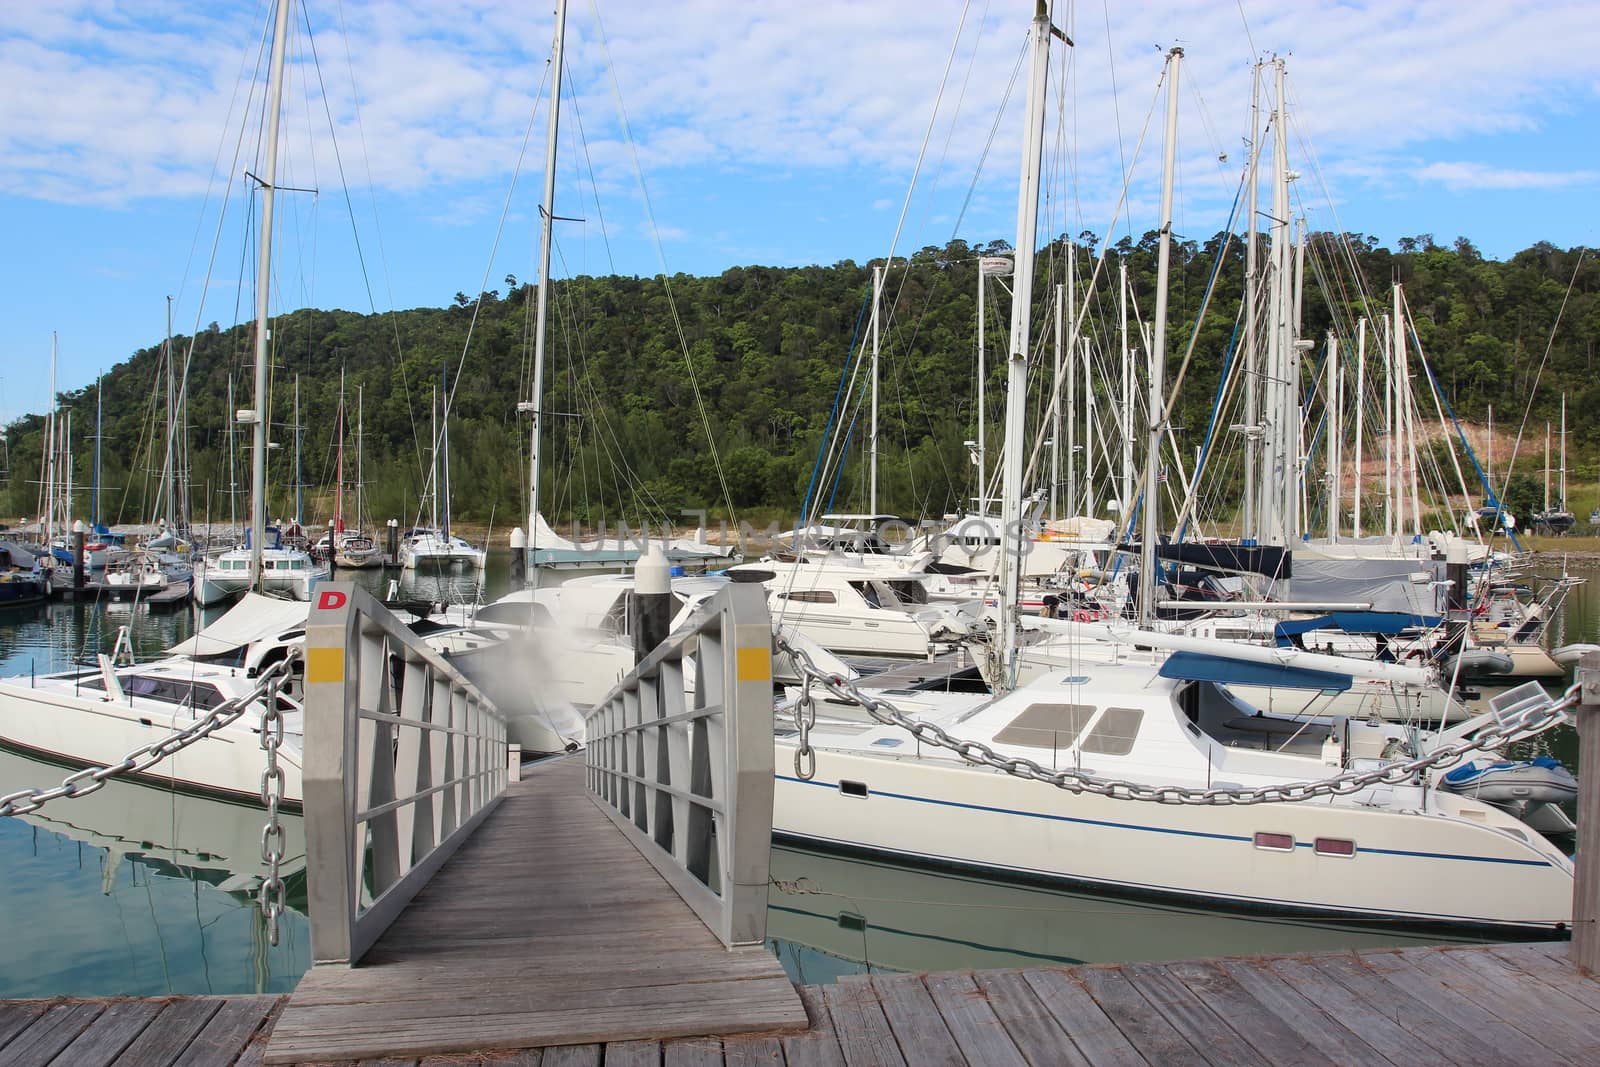 Yacht parking on the island